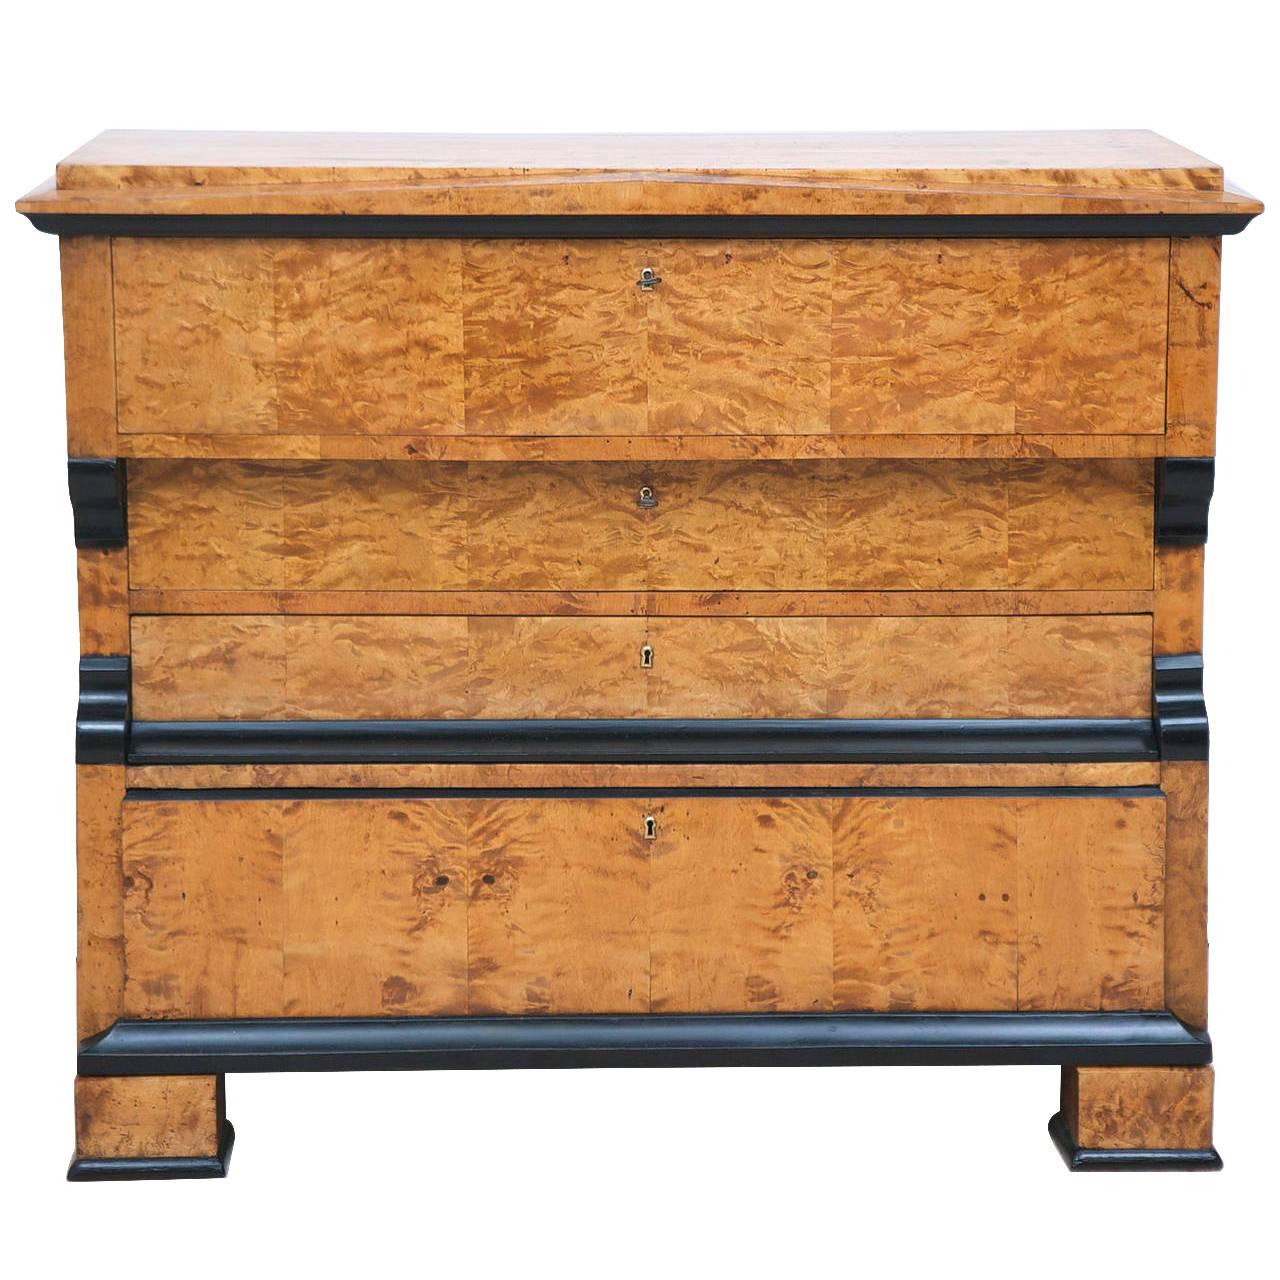 A very handsome birch Karl Johan Biedermeier chest of drawers with a drawer front fold down secretary. The drawer-front opens to an ample and beautiful ebonized and faux mahogany interior offering two letter drawers flanking the central cubby, which